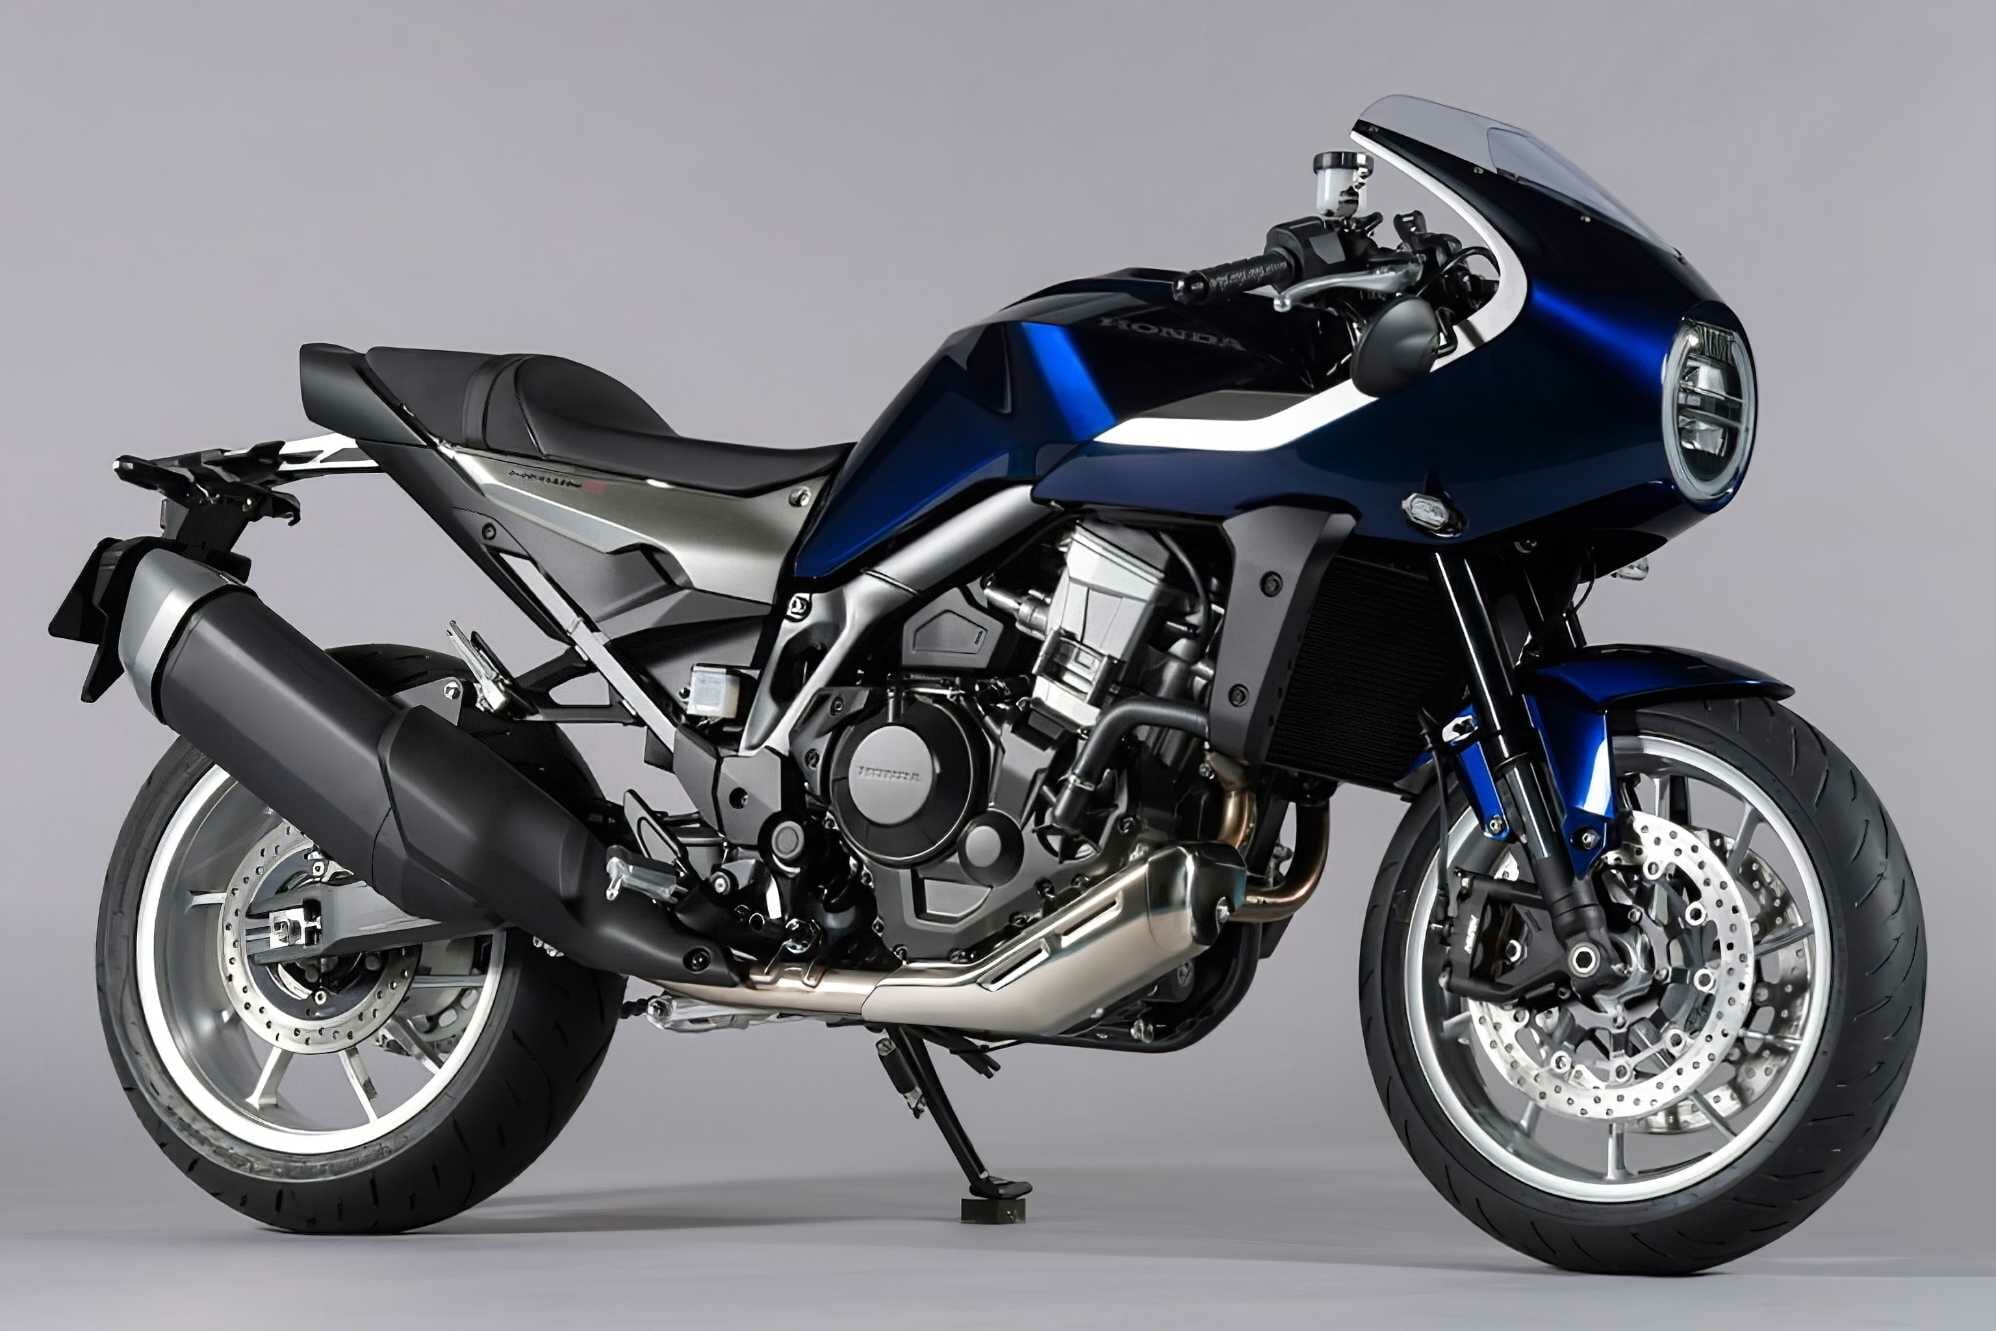 Data of the Honda Hawk 11 - at least for Japan - MOTORCYCLES.NEWS